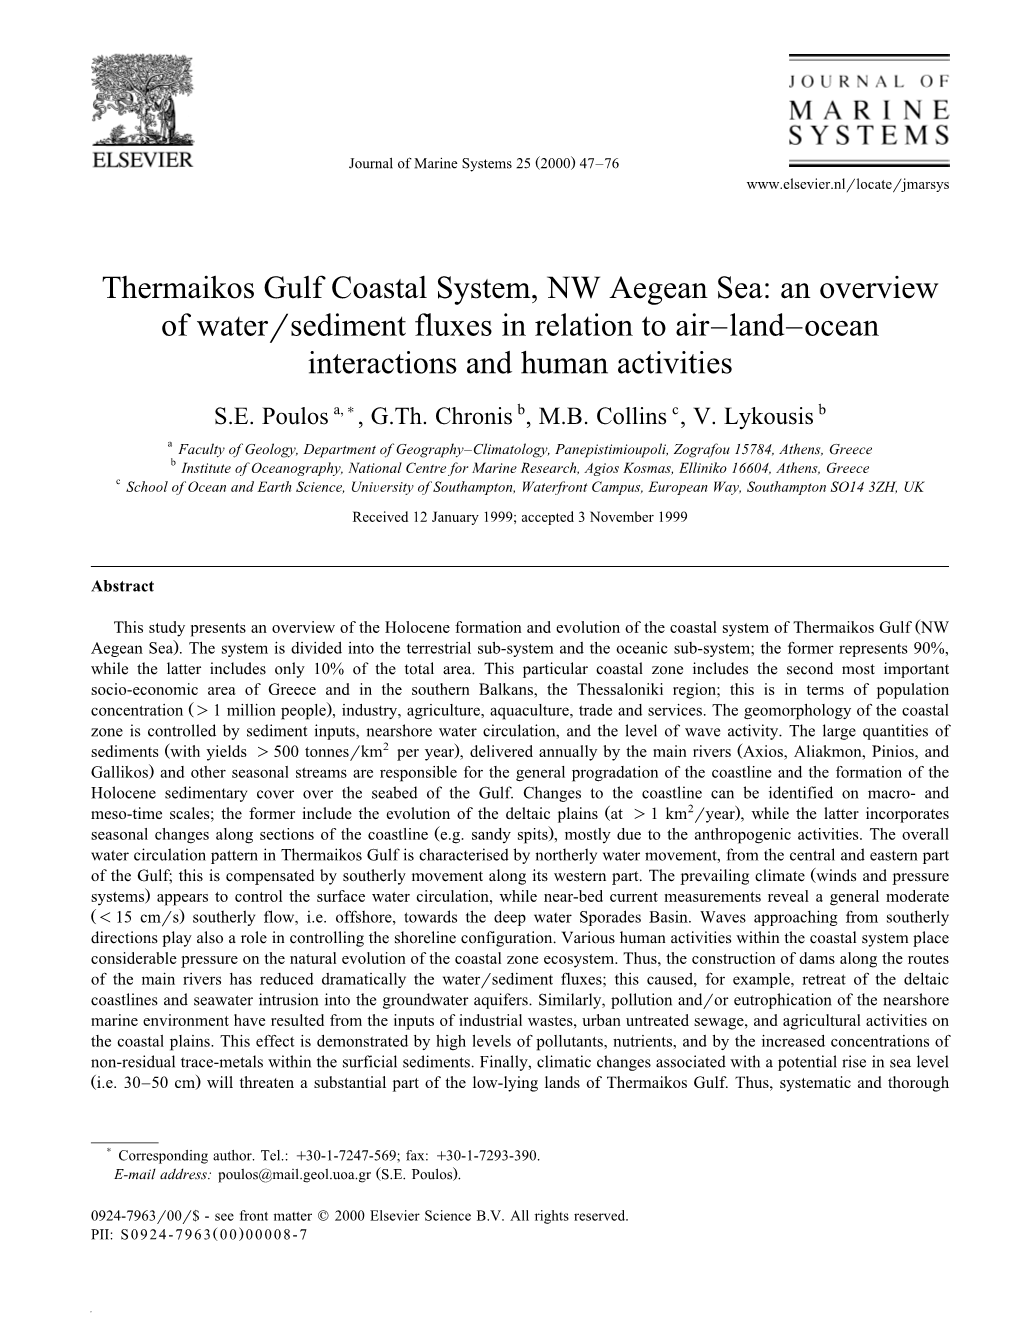 Thermaikos Gulf Coastal System, NW Aegean Sea: an Overview of Waterrsediment Fluxes in Relation to Air±Land±Ocean Interactions and Human Activities